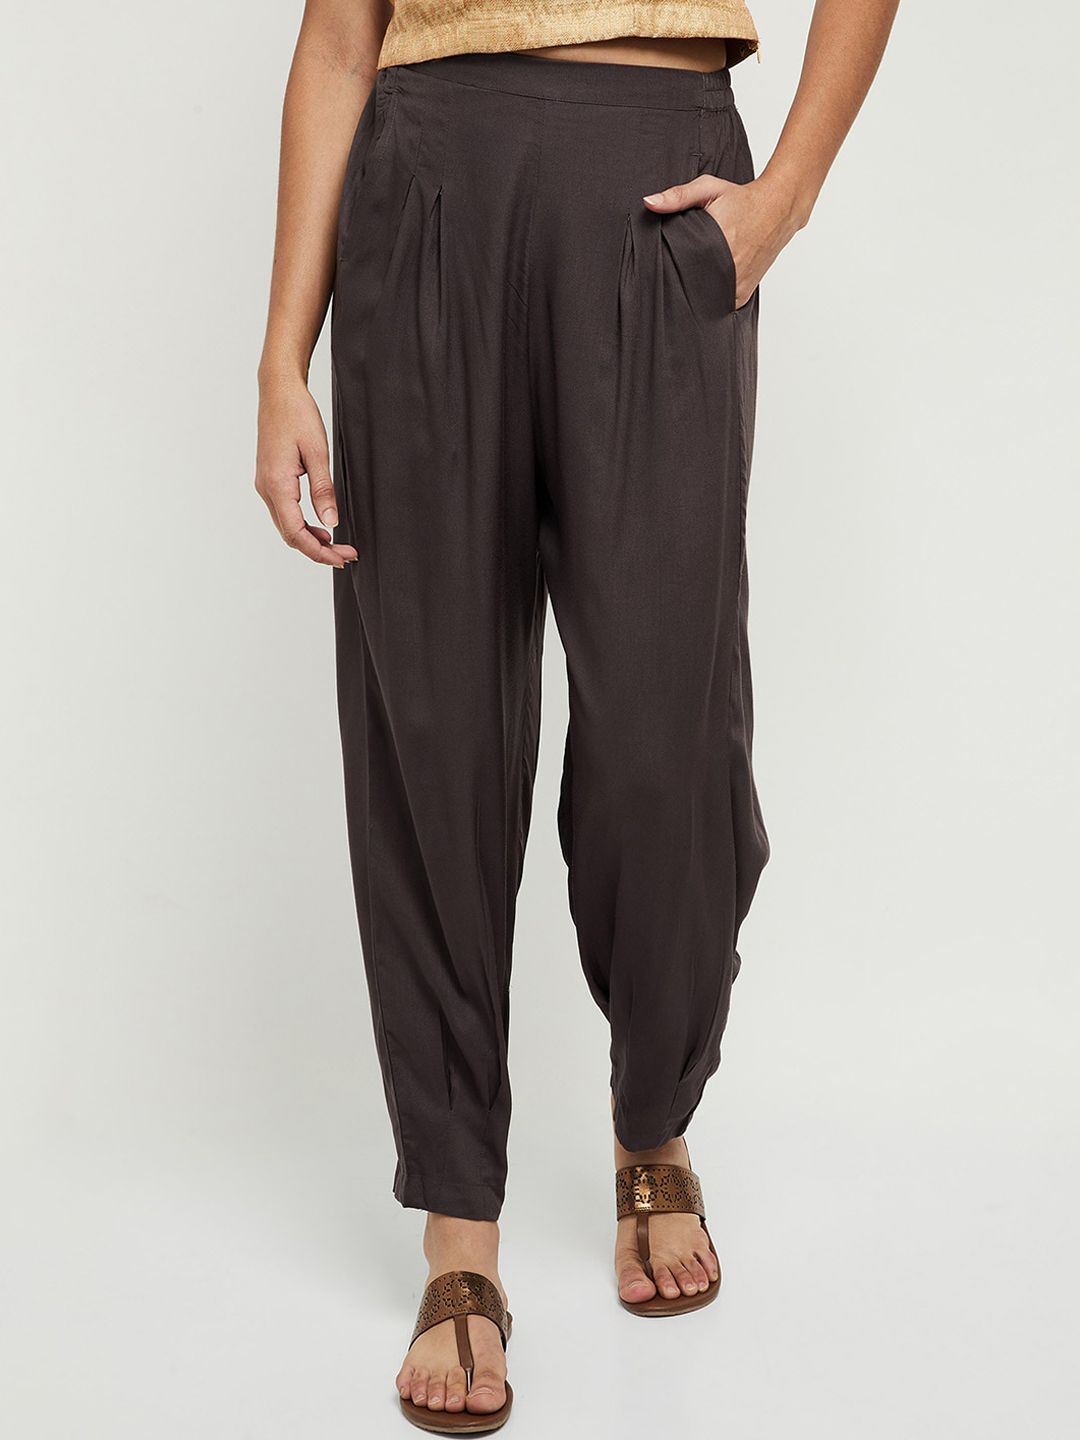 max Women Charcoal Pleated Mid-Rise Cotton Trousers Price in India